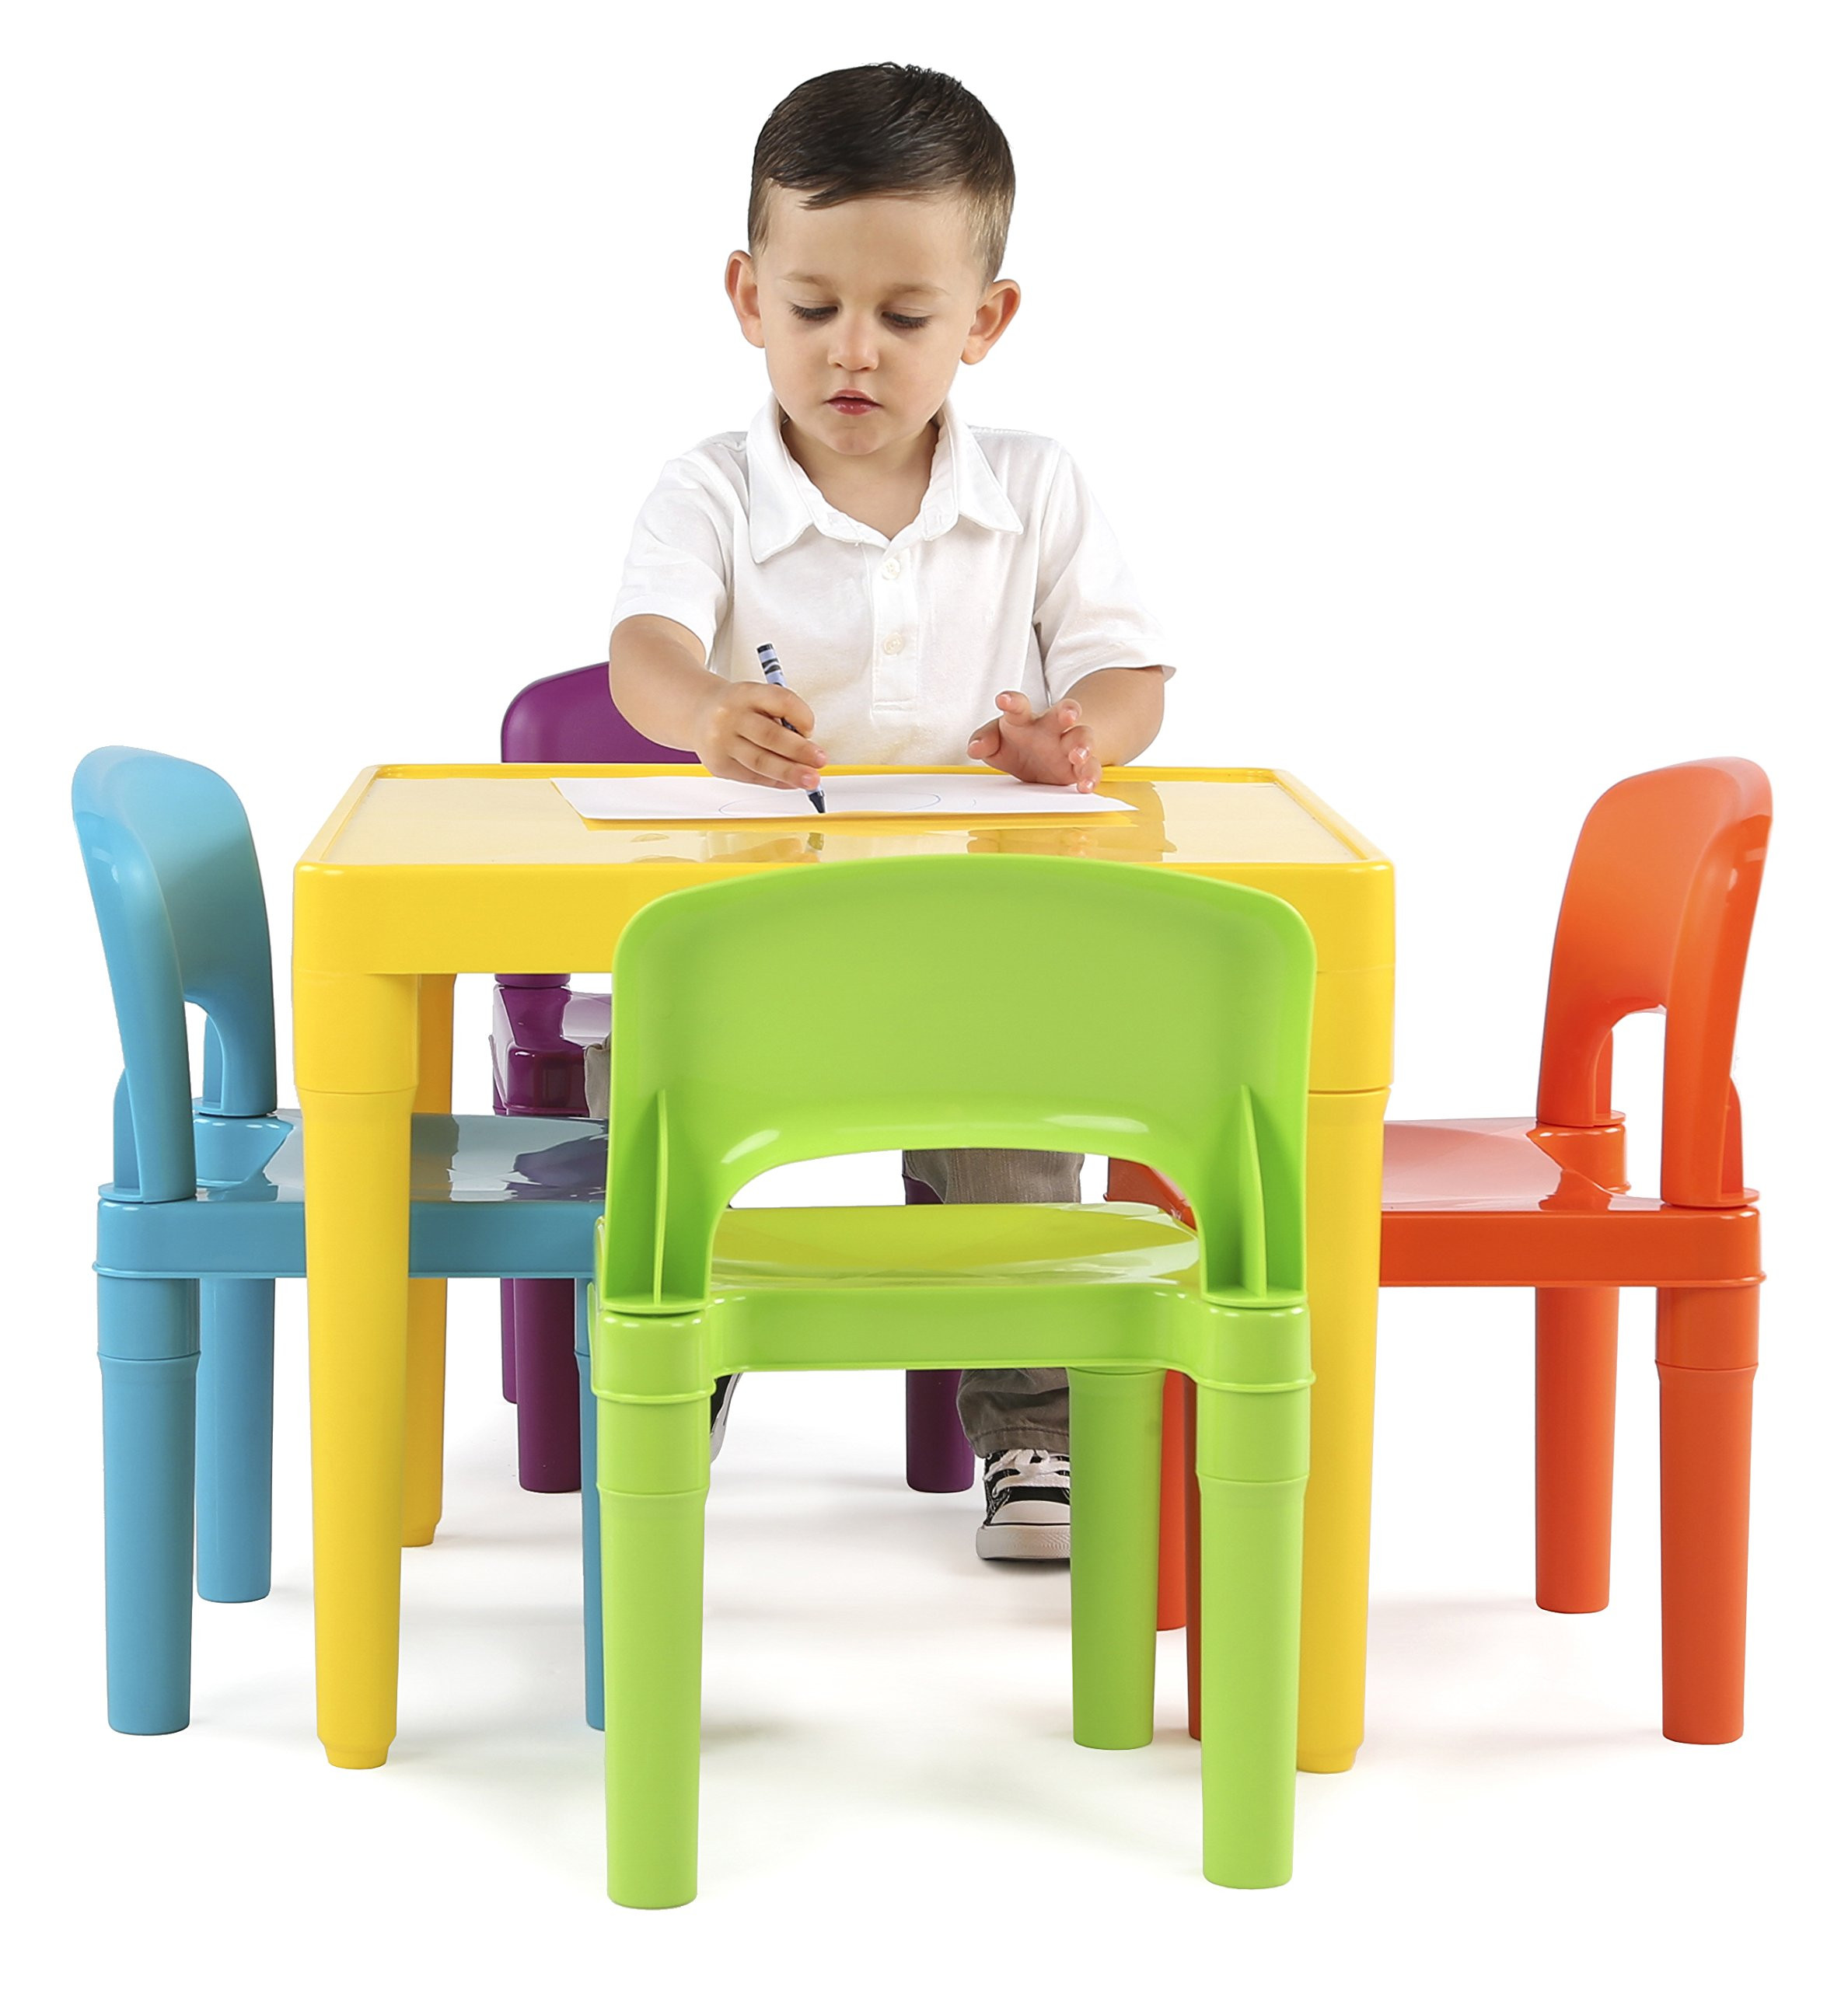 Amazon Kids Table And Chairs
 Tot Tutors Kids Plastic Table and 4 Chairs Set Vibrant